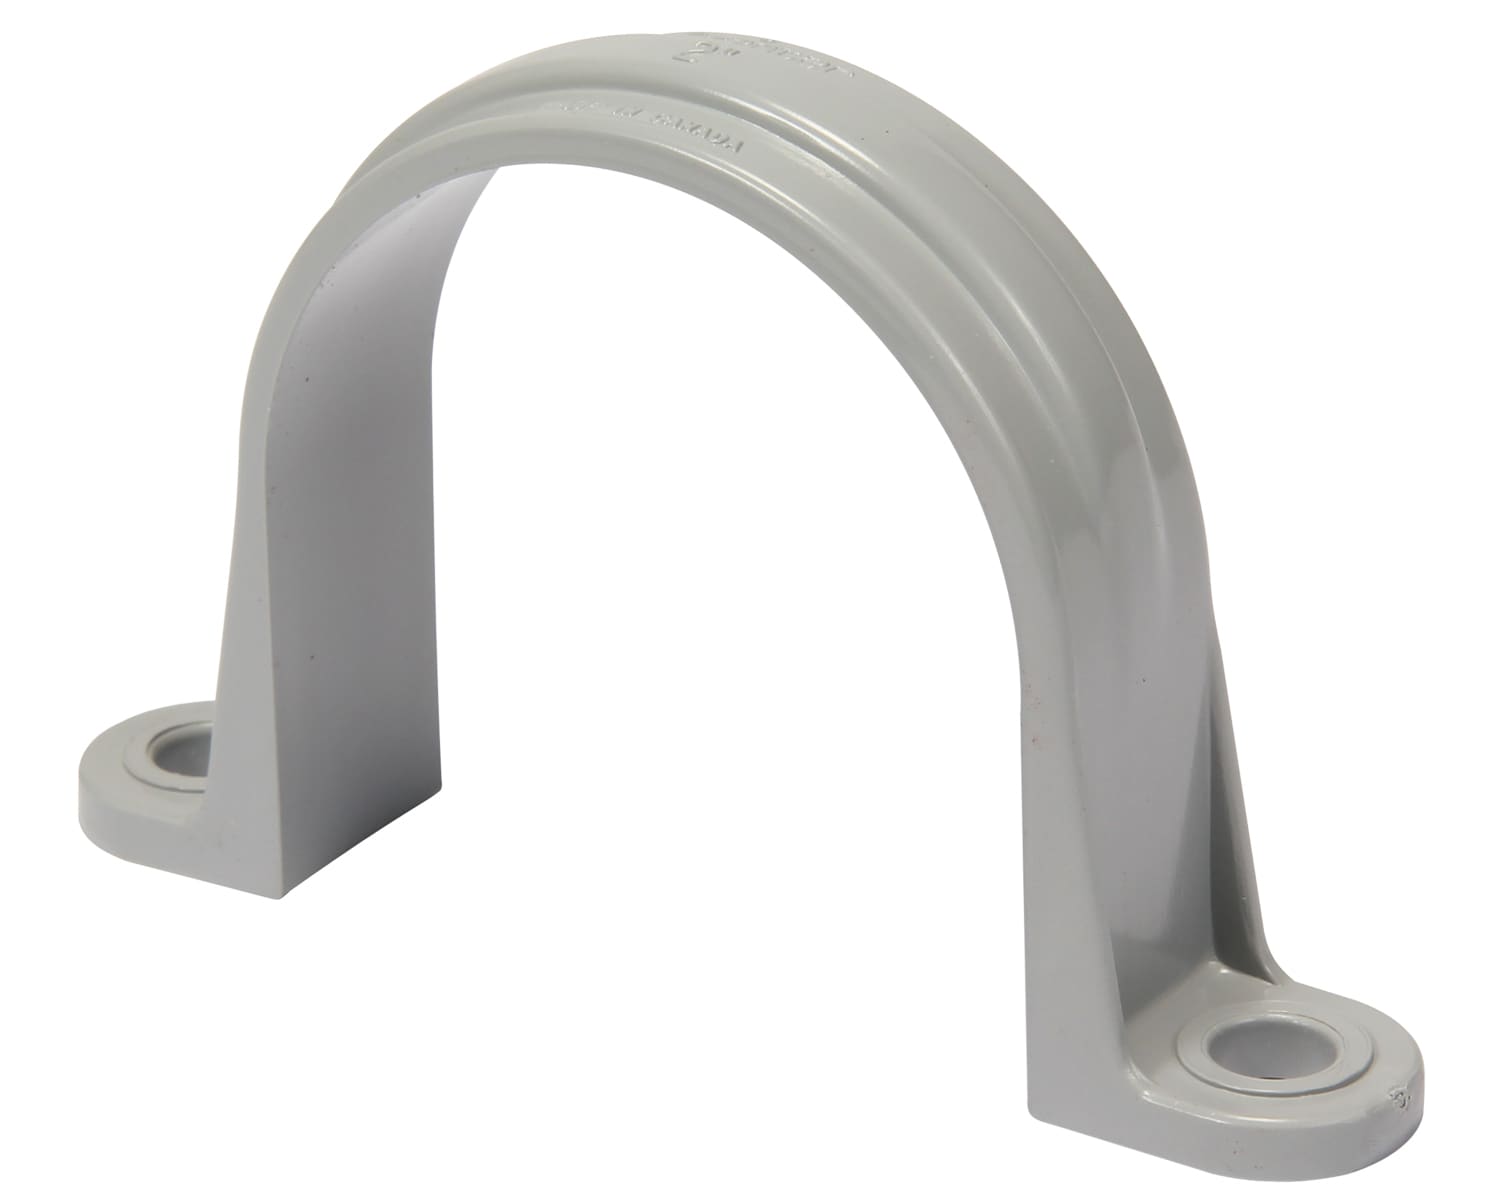 Strap Conduit Fittings at Lowes.com